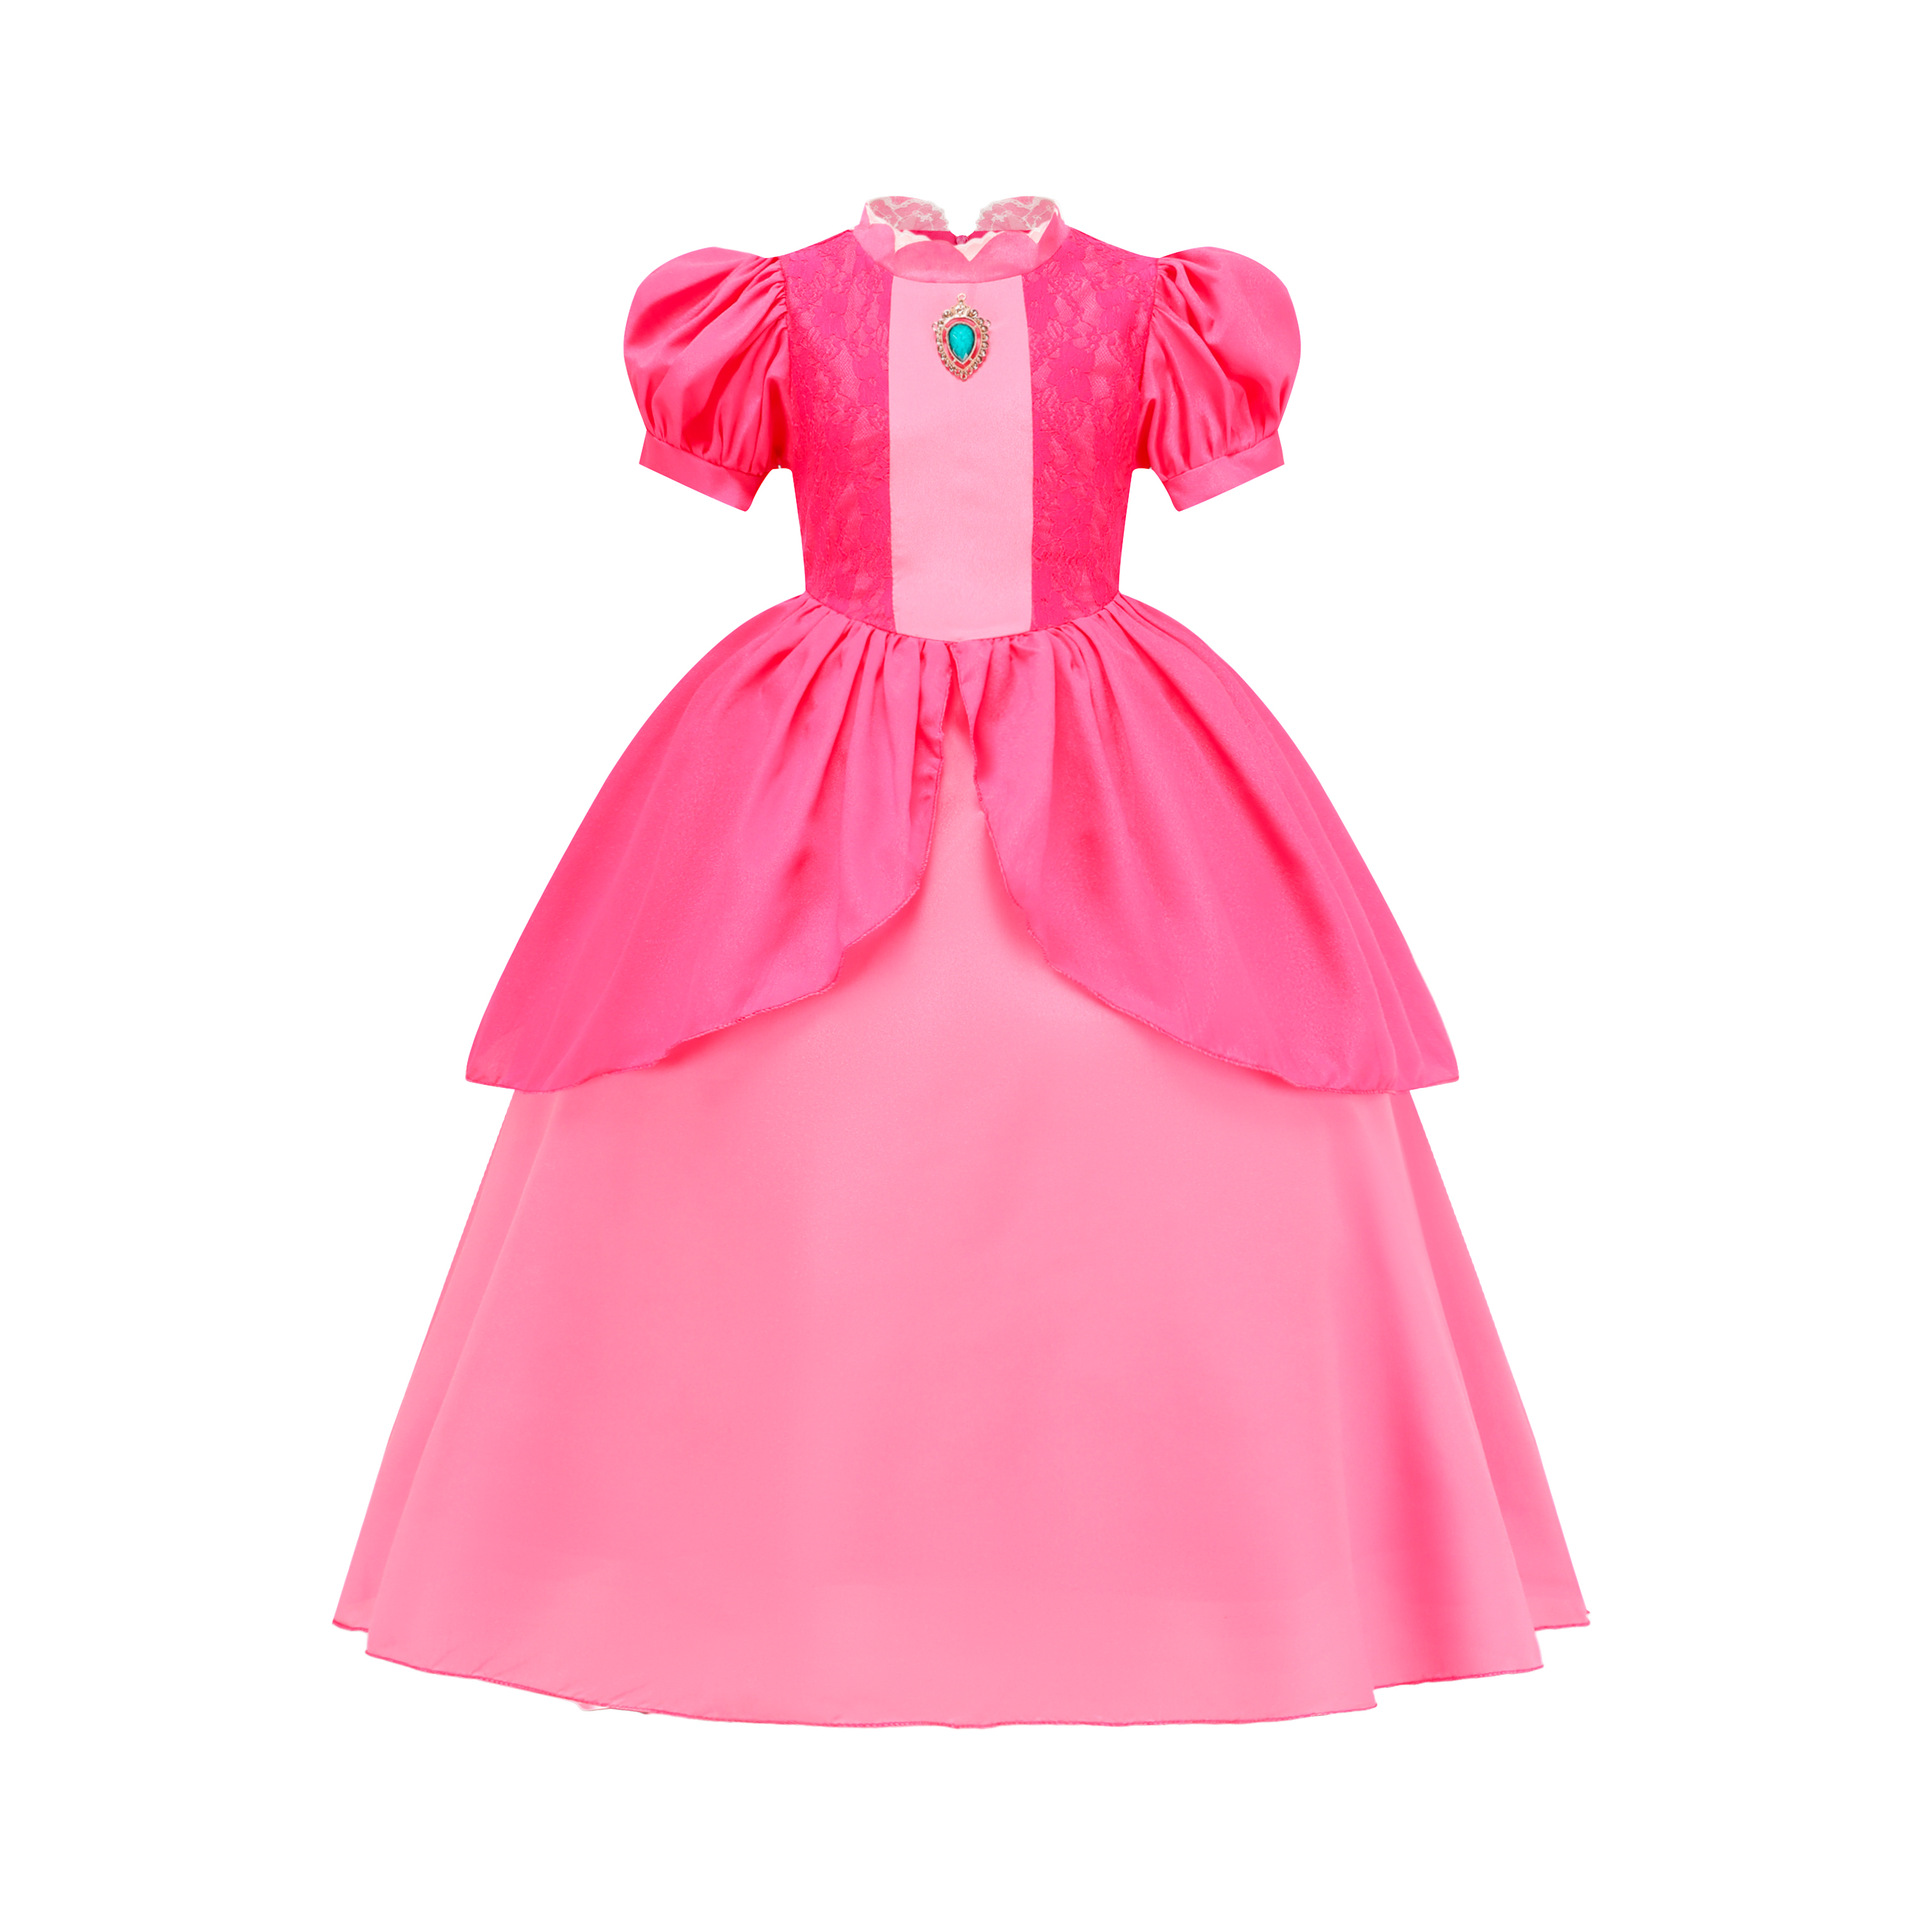 Princess Sparkle Cosplay Dress for Girls with Puffed Sleeves - Halloween Hit